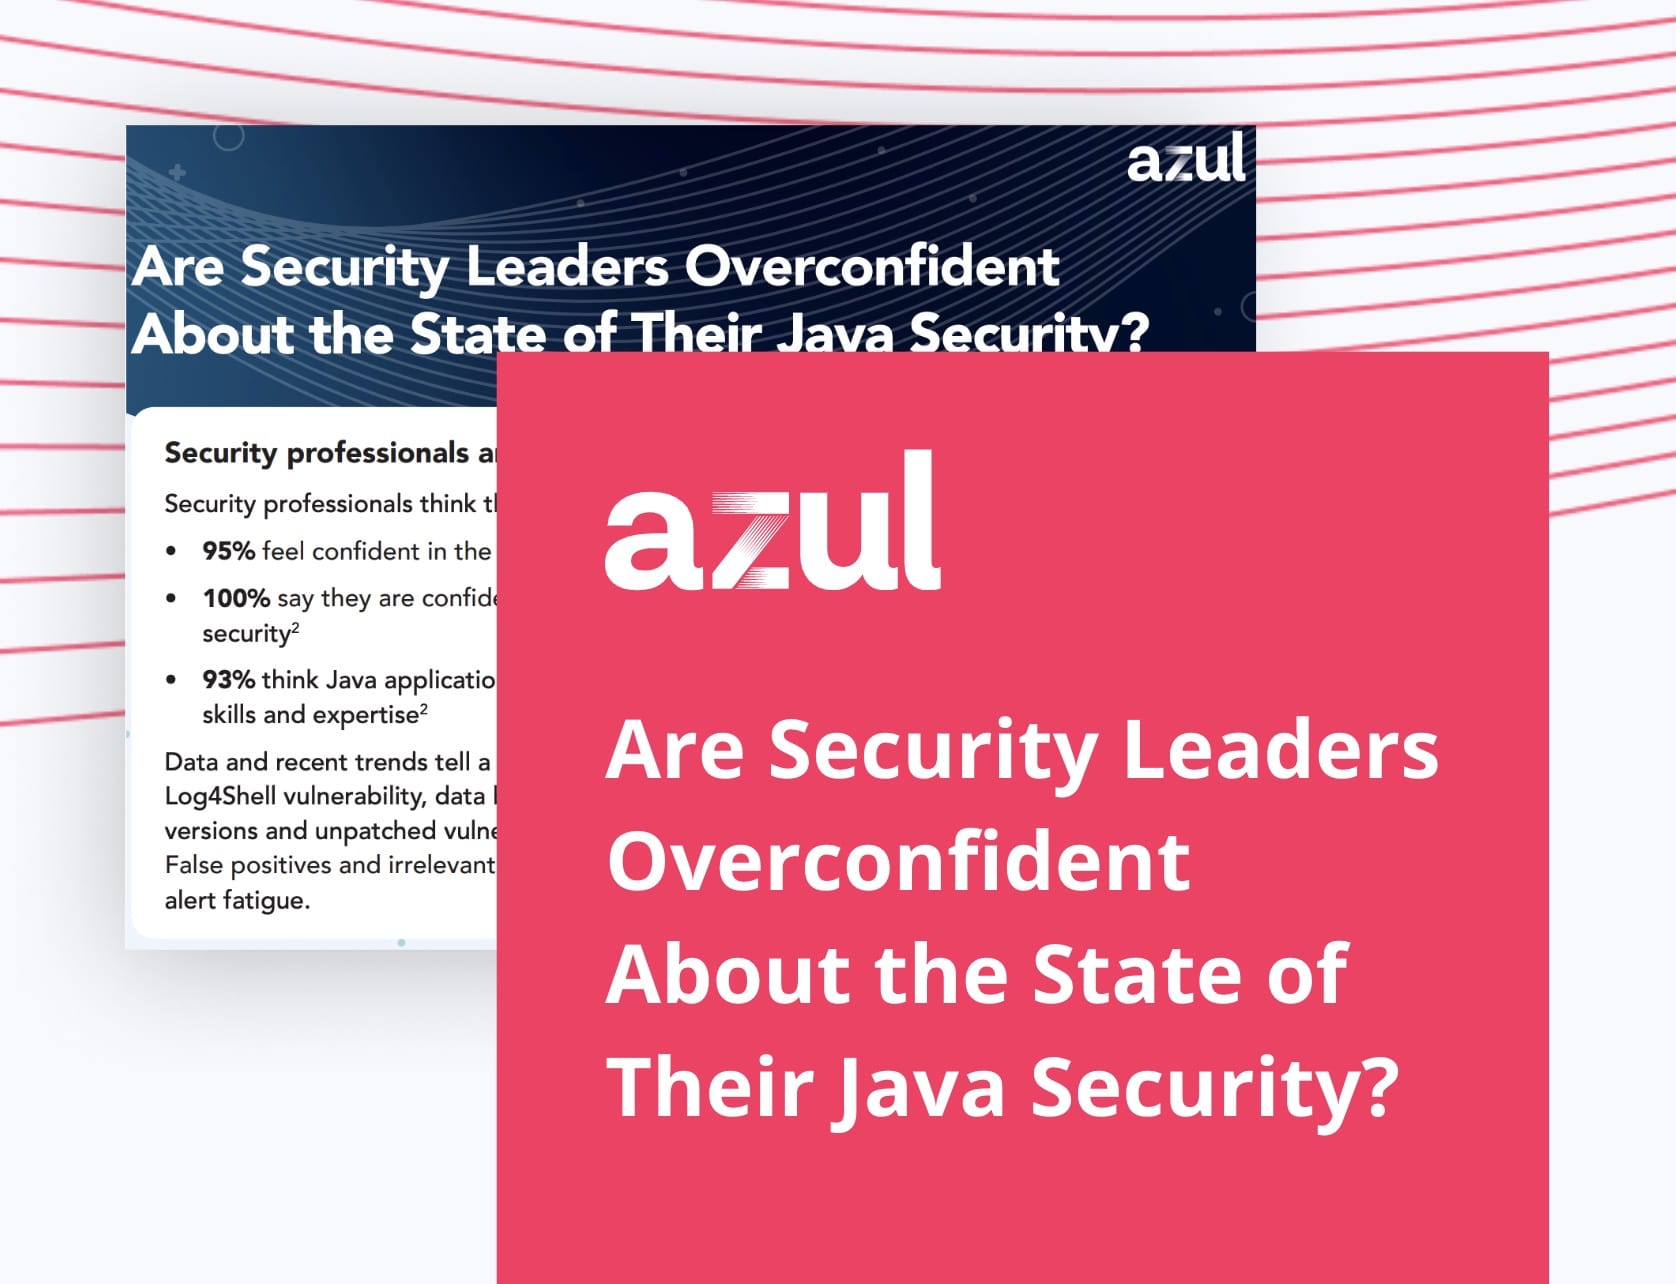 Are Security Leaders Overconfident About the State of Their Java Security Infogrpahic